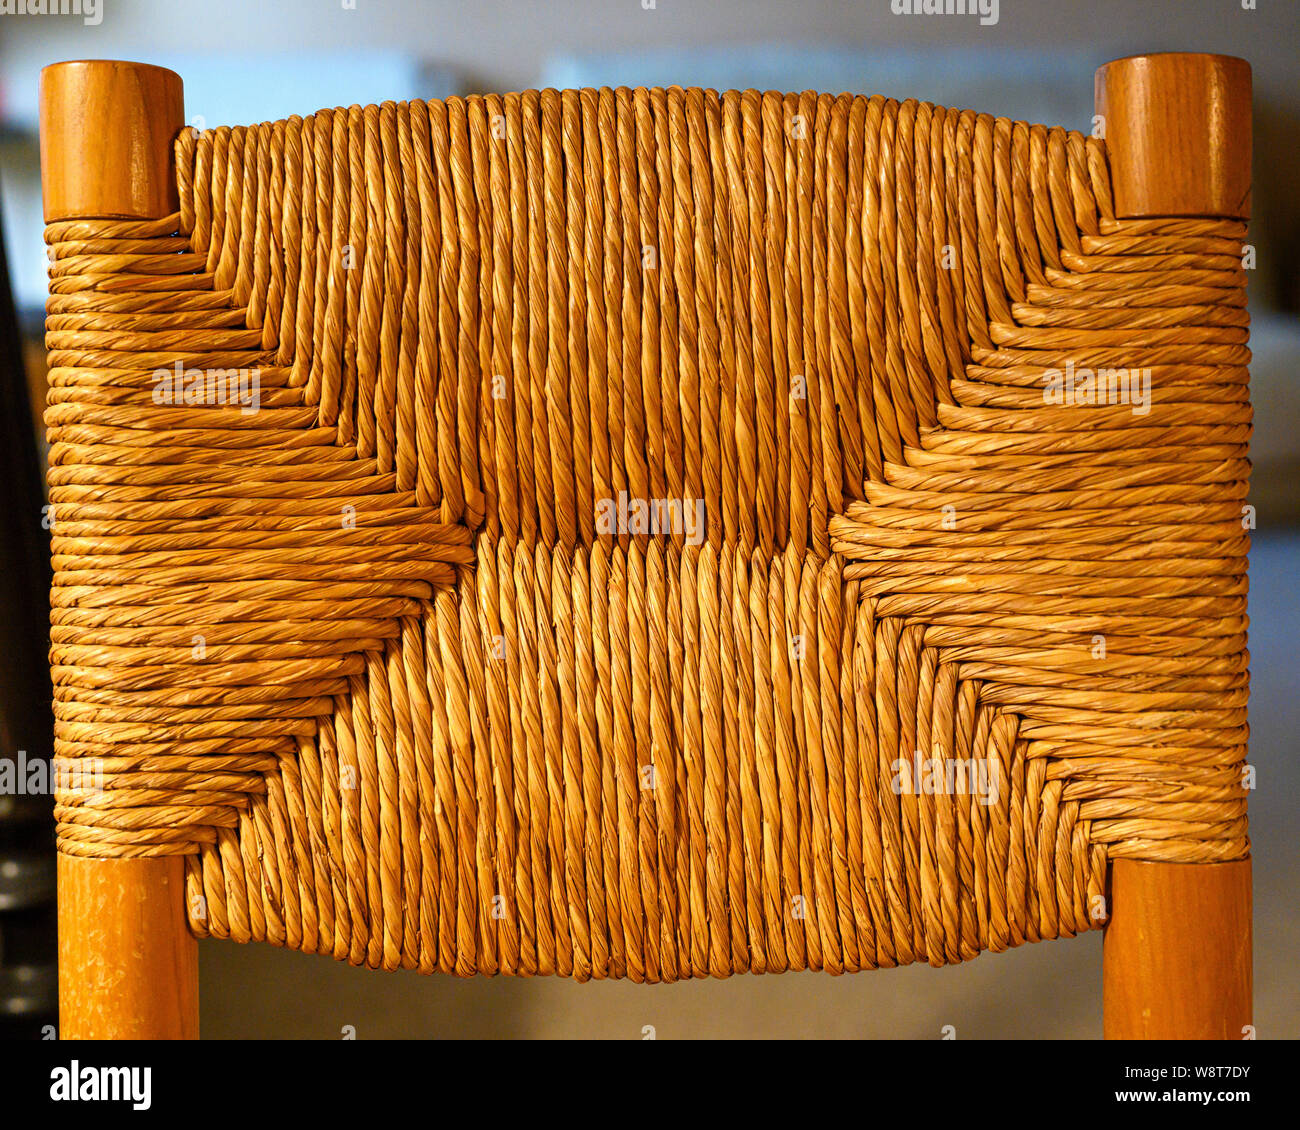 Straw chair's back, France, Europe, Stock Photo